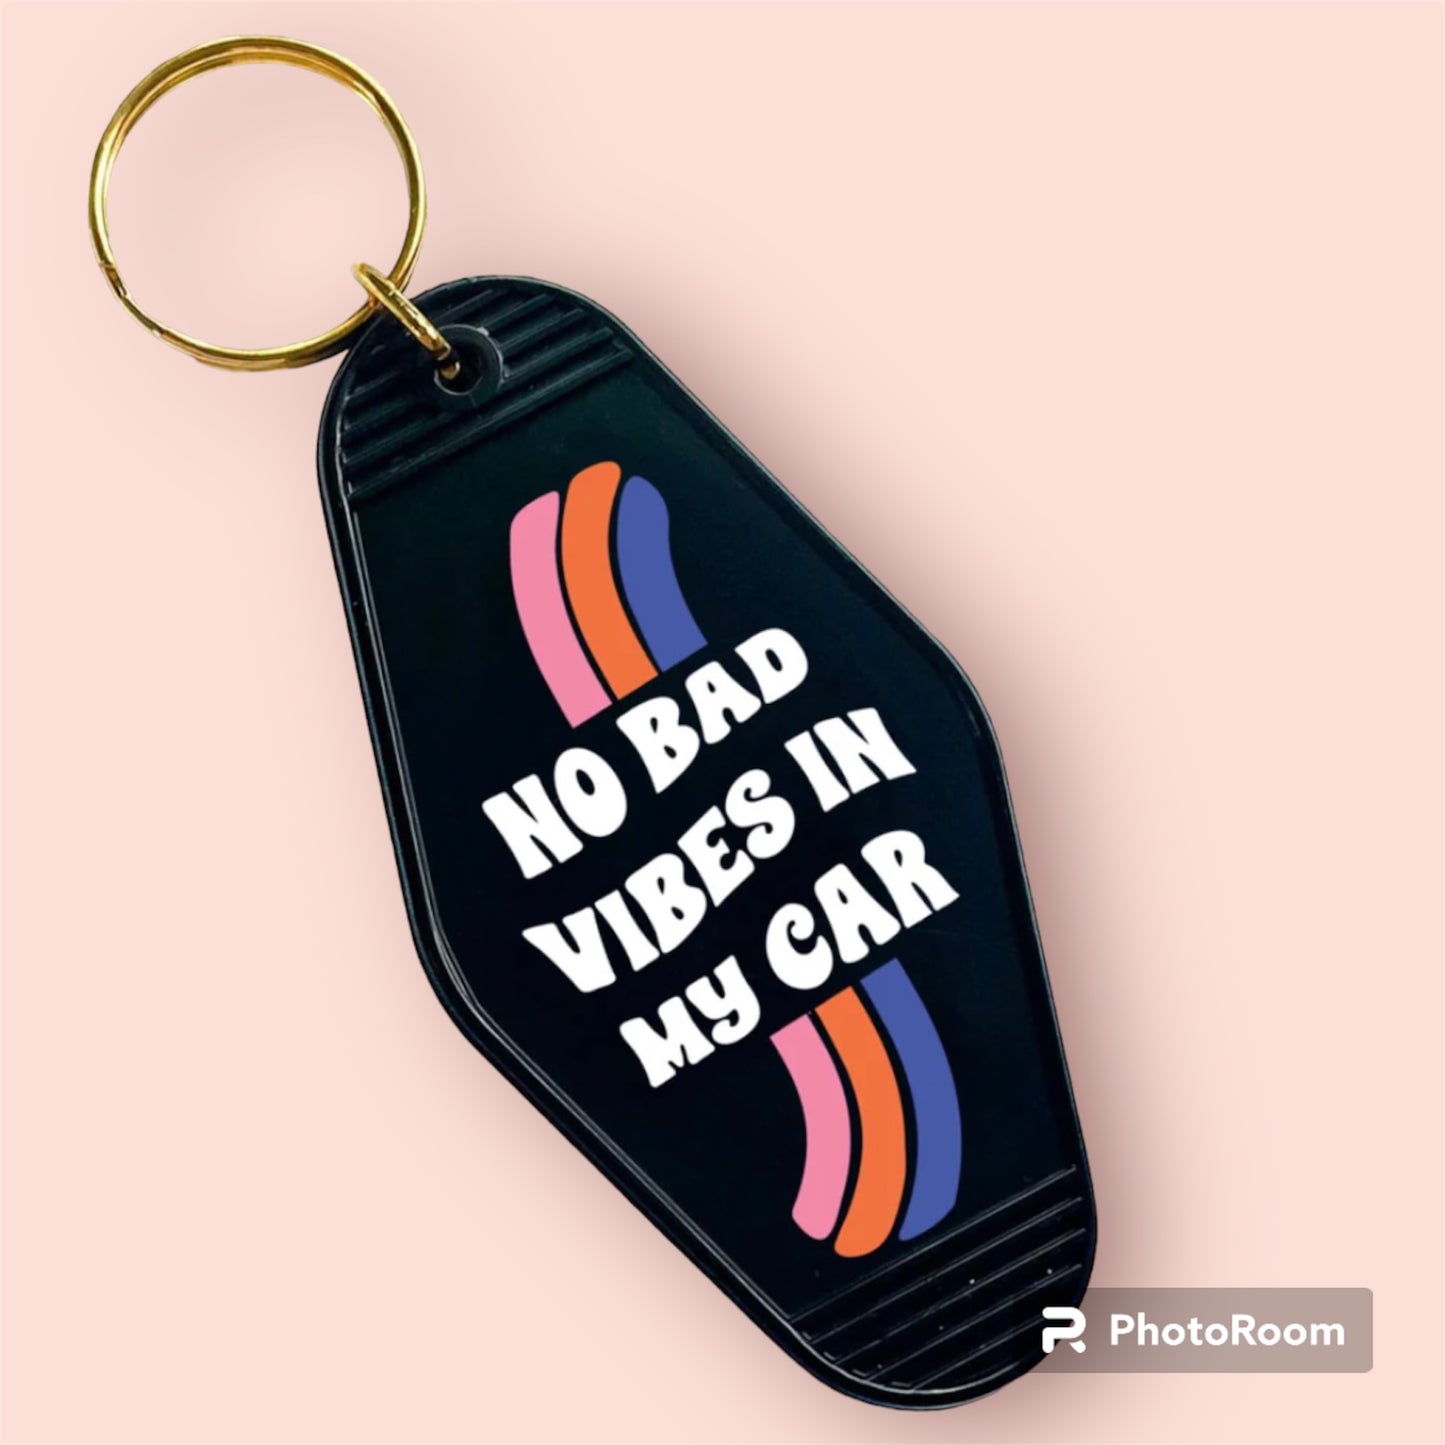 No Bad Vibes in my Car-UVDTF Keychain Decal